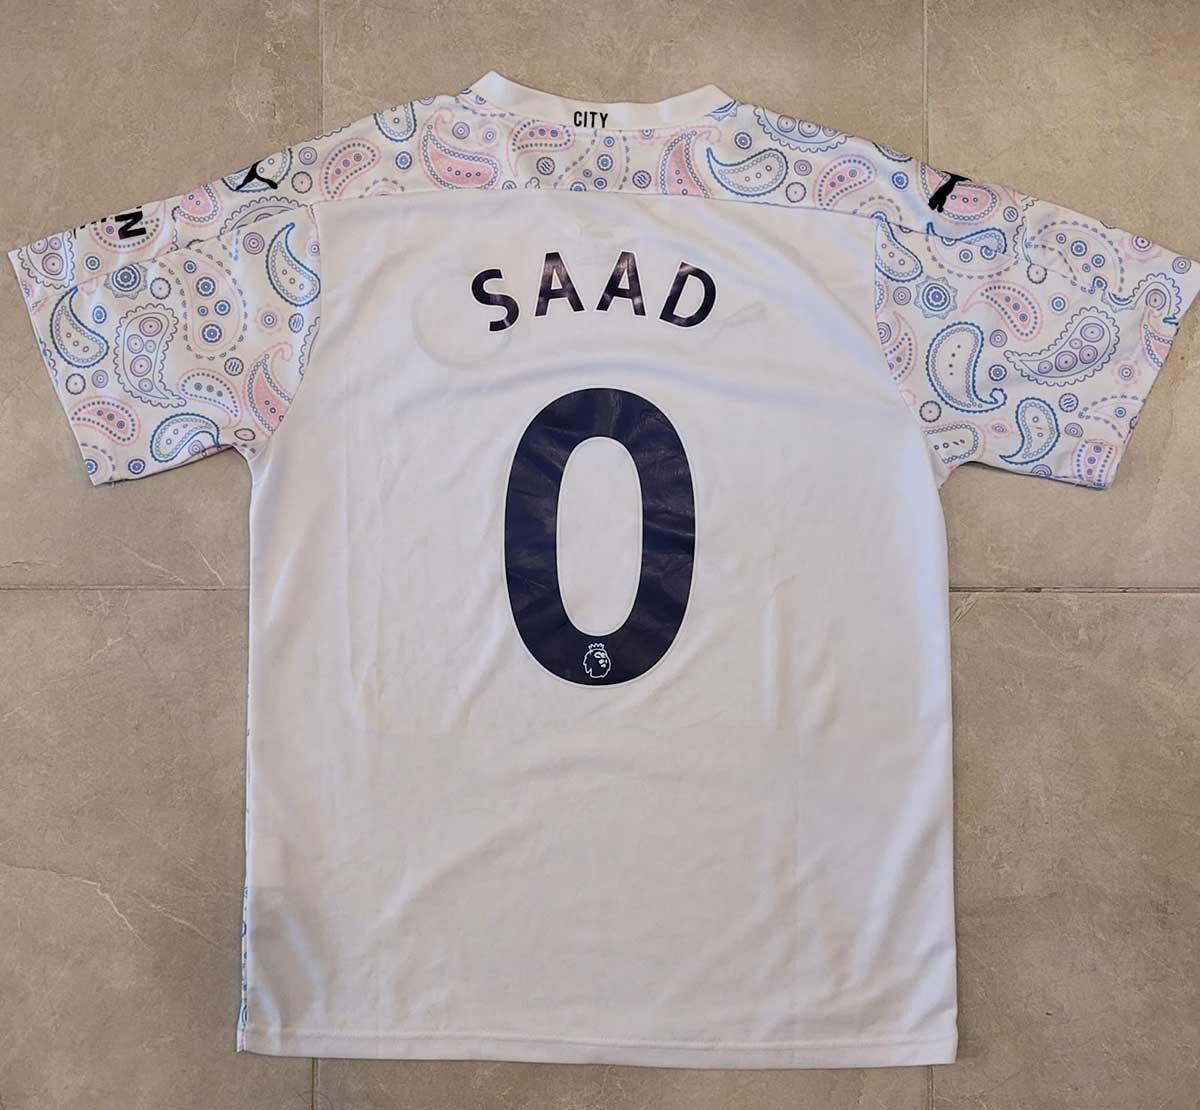 soccer jersey with the name saad and number 0 on the back